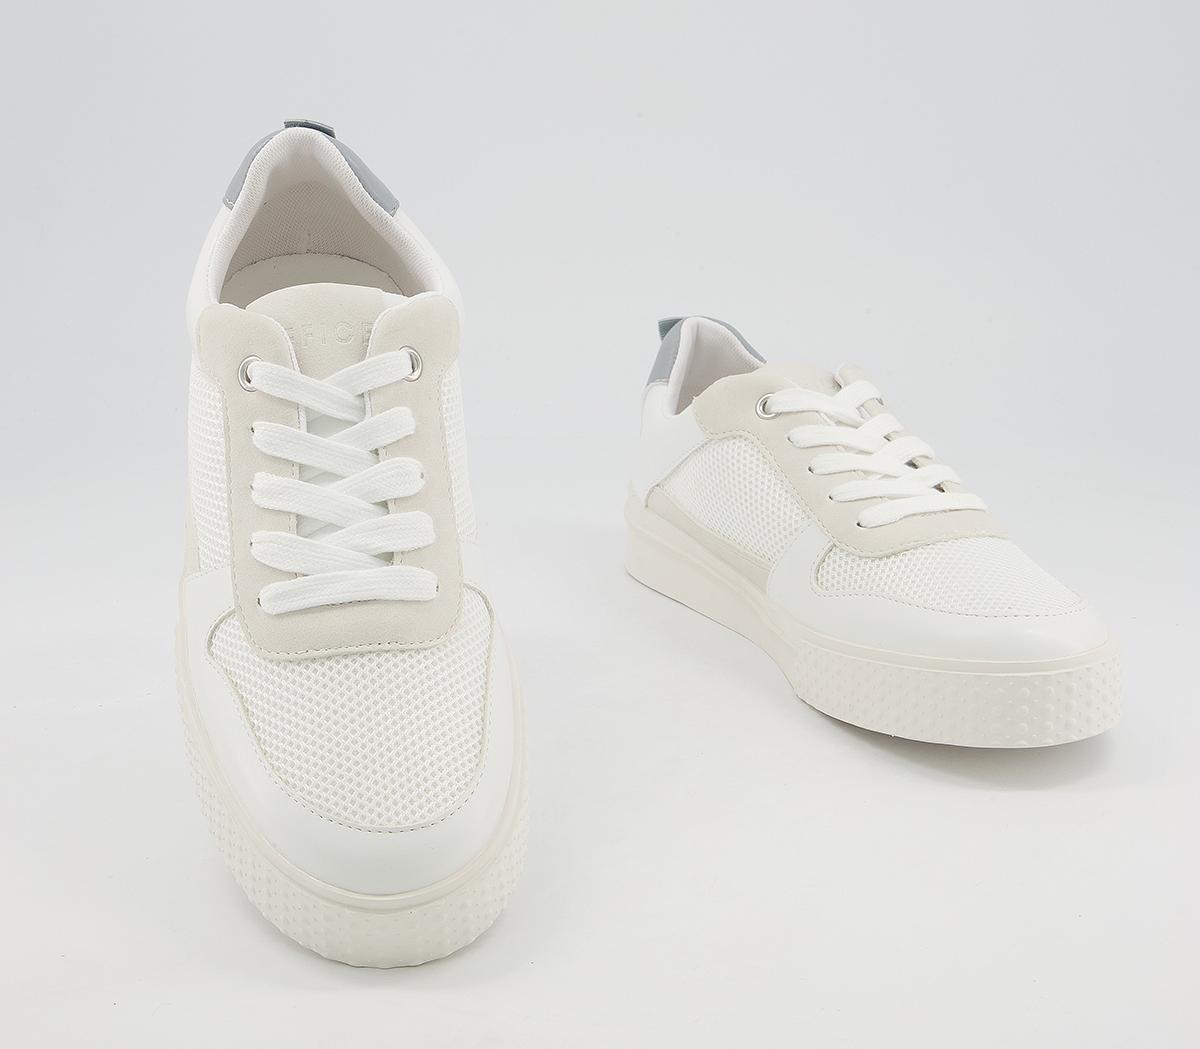 OFFICE Forwards Textured Sole Lace Up Trainers White Blue Nude Mix ...